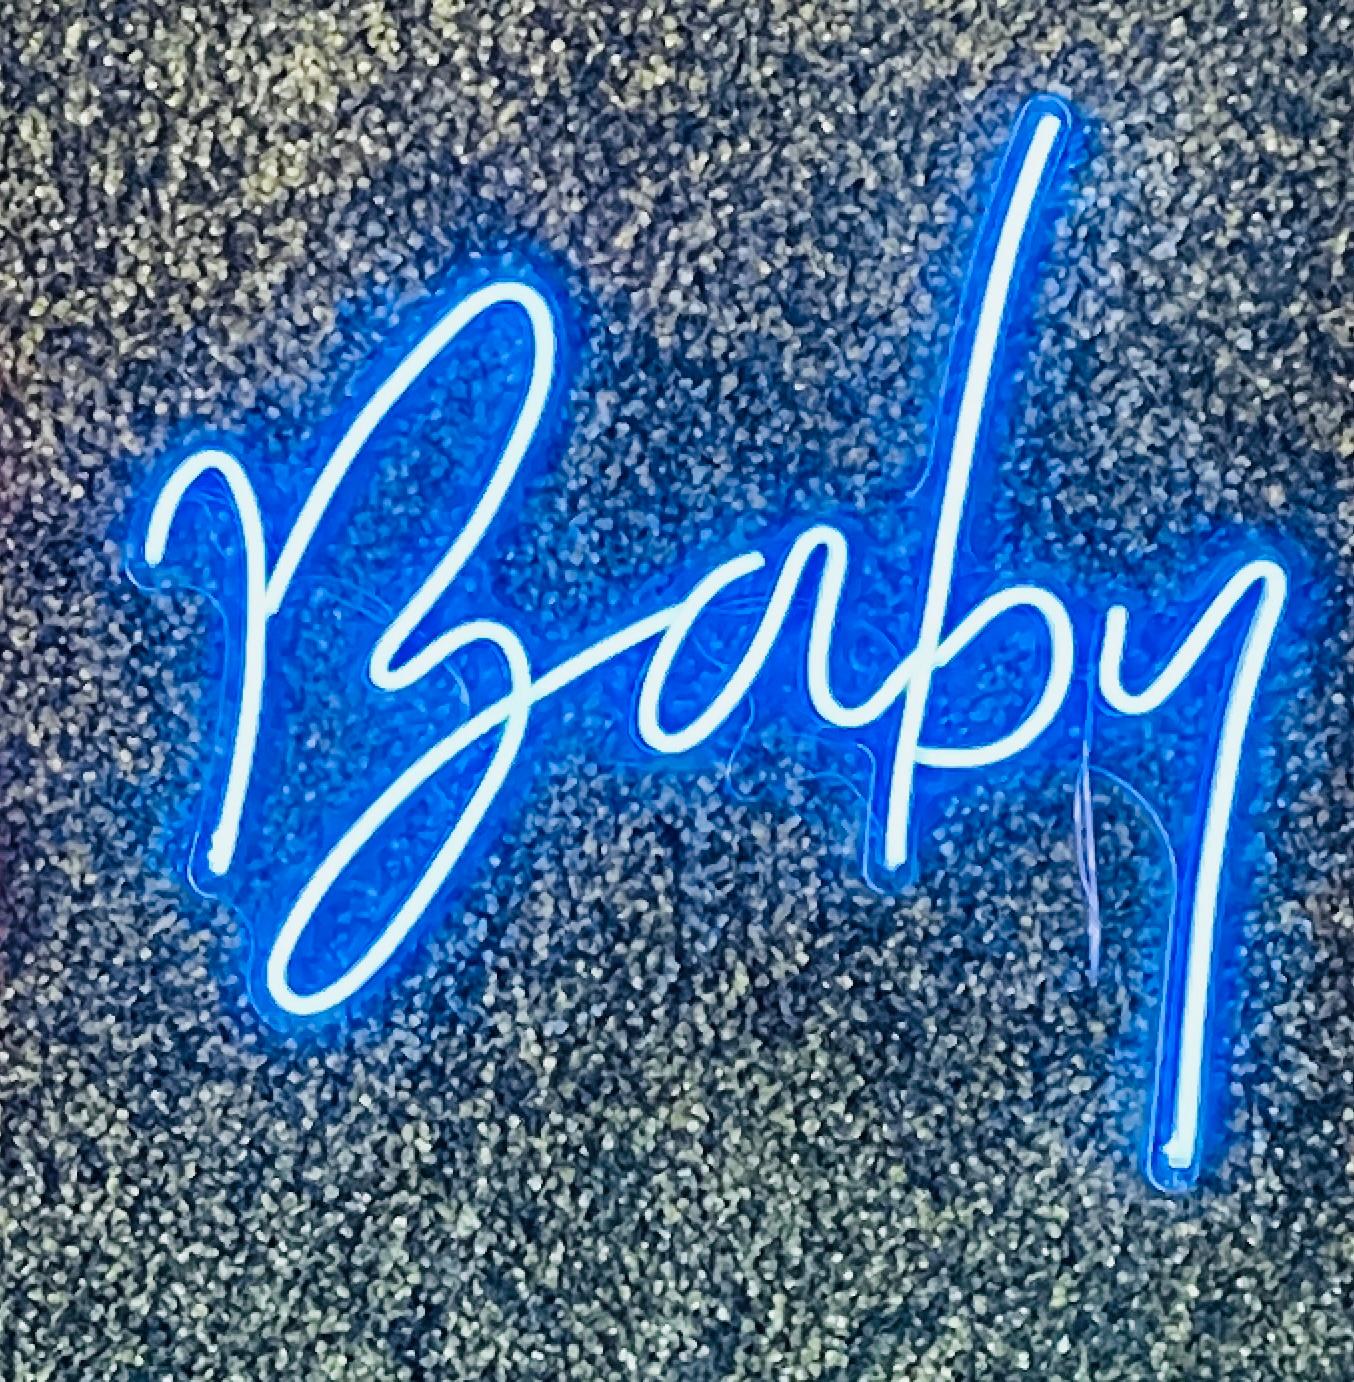 Baby neon sign